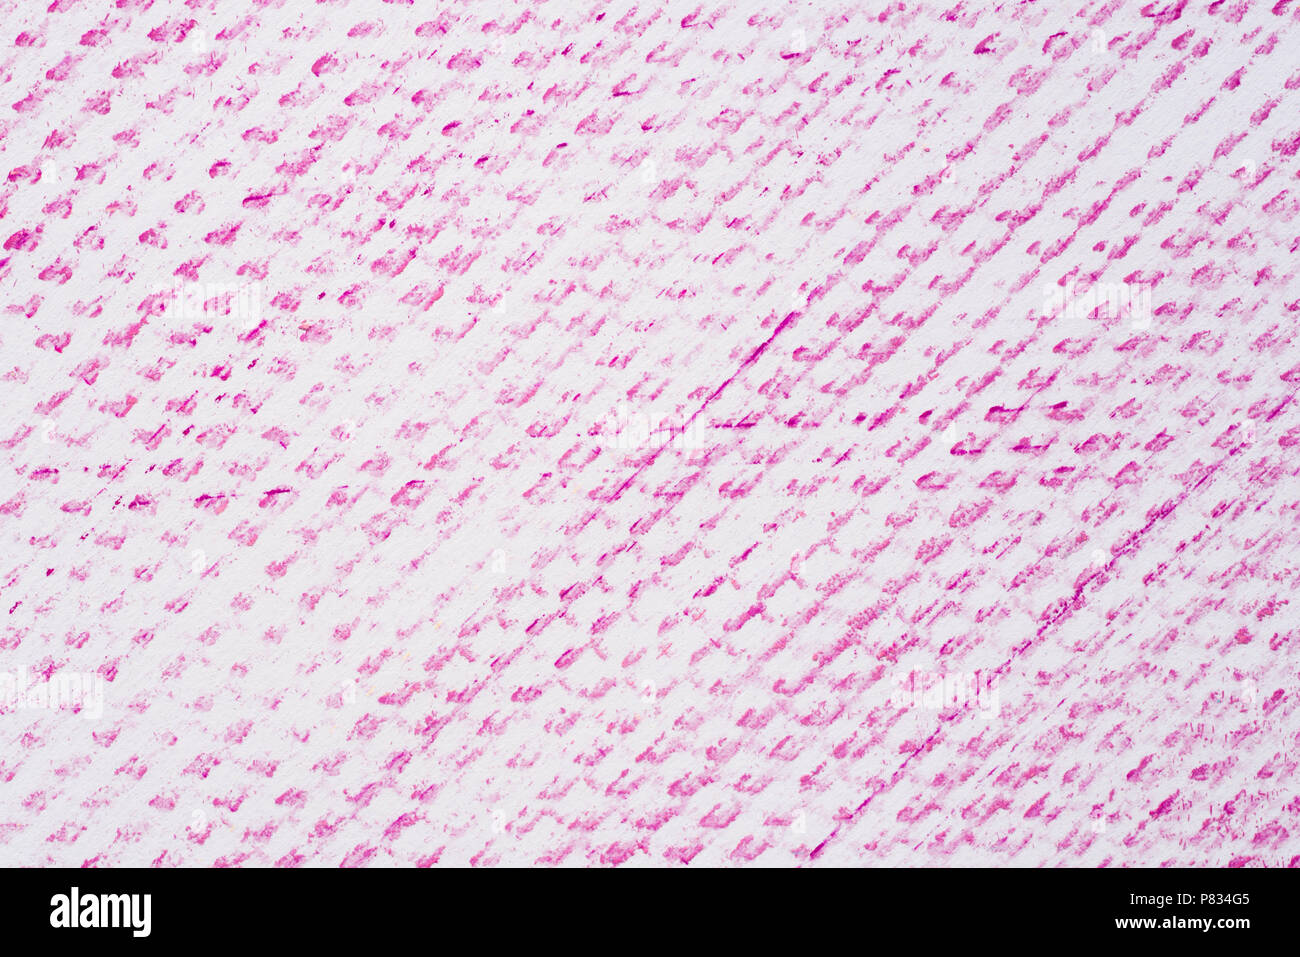 violet color crayon pattern on white paper background texture Stock Photo